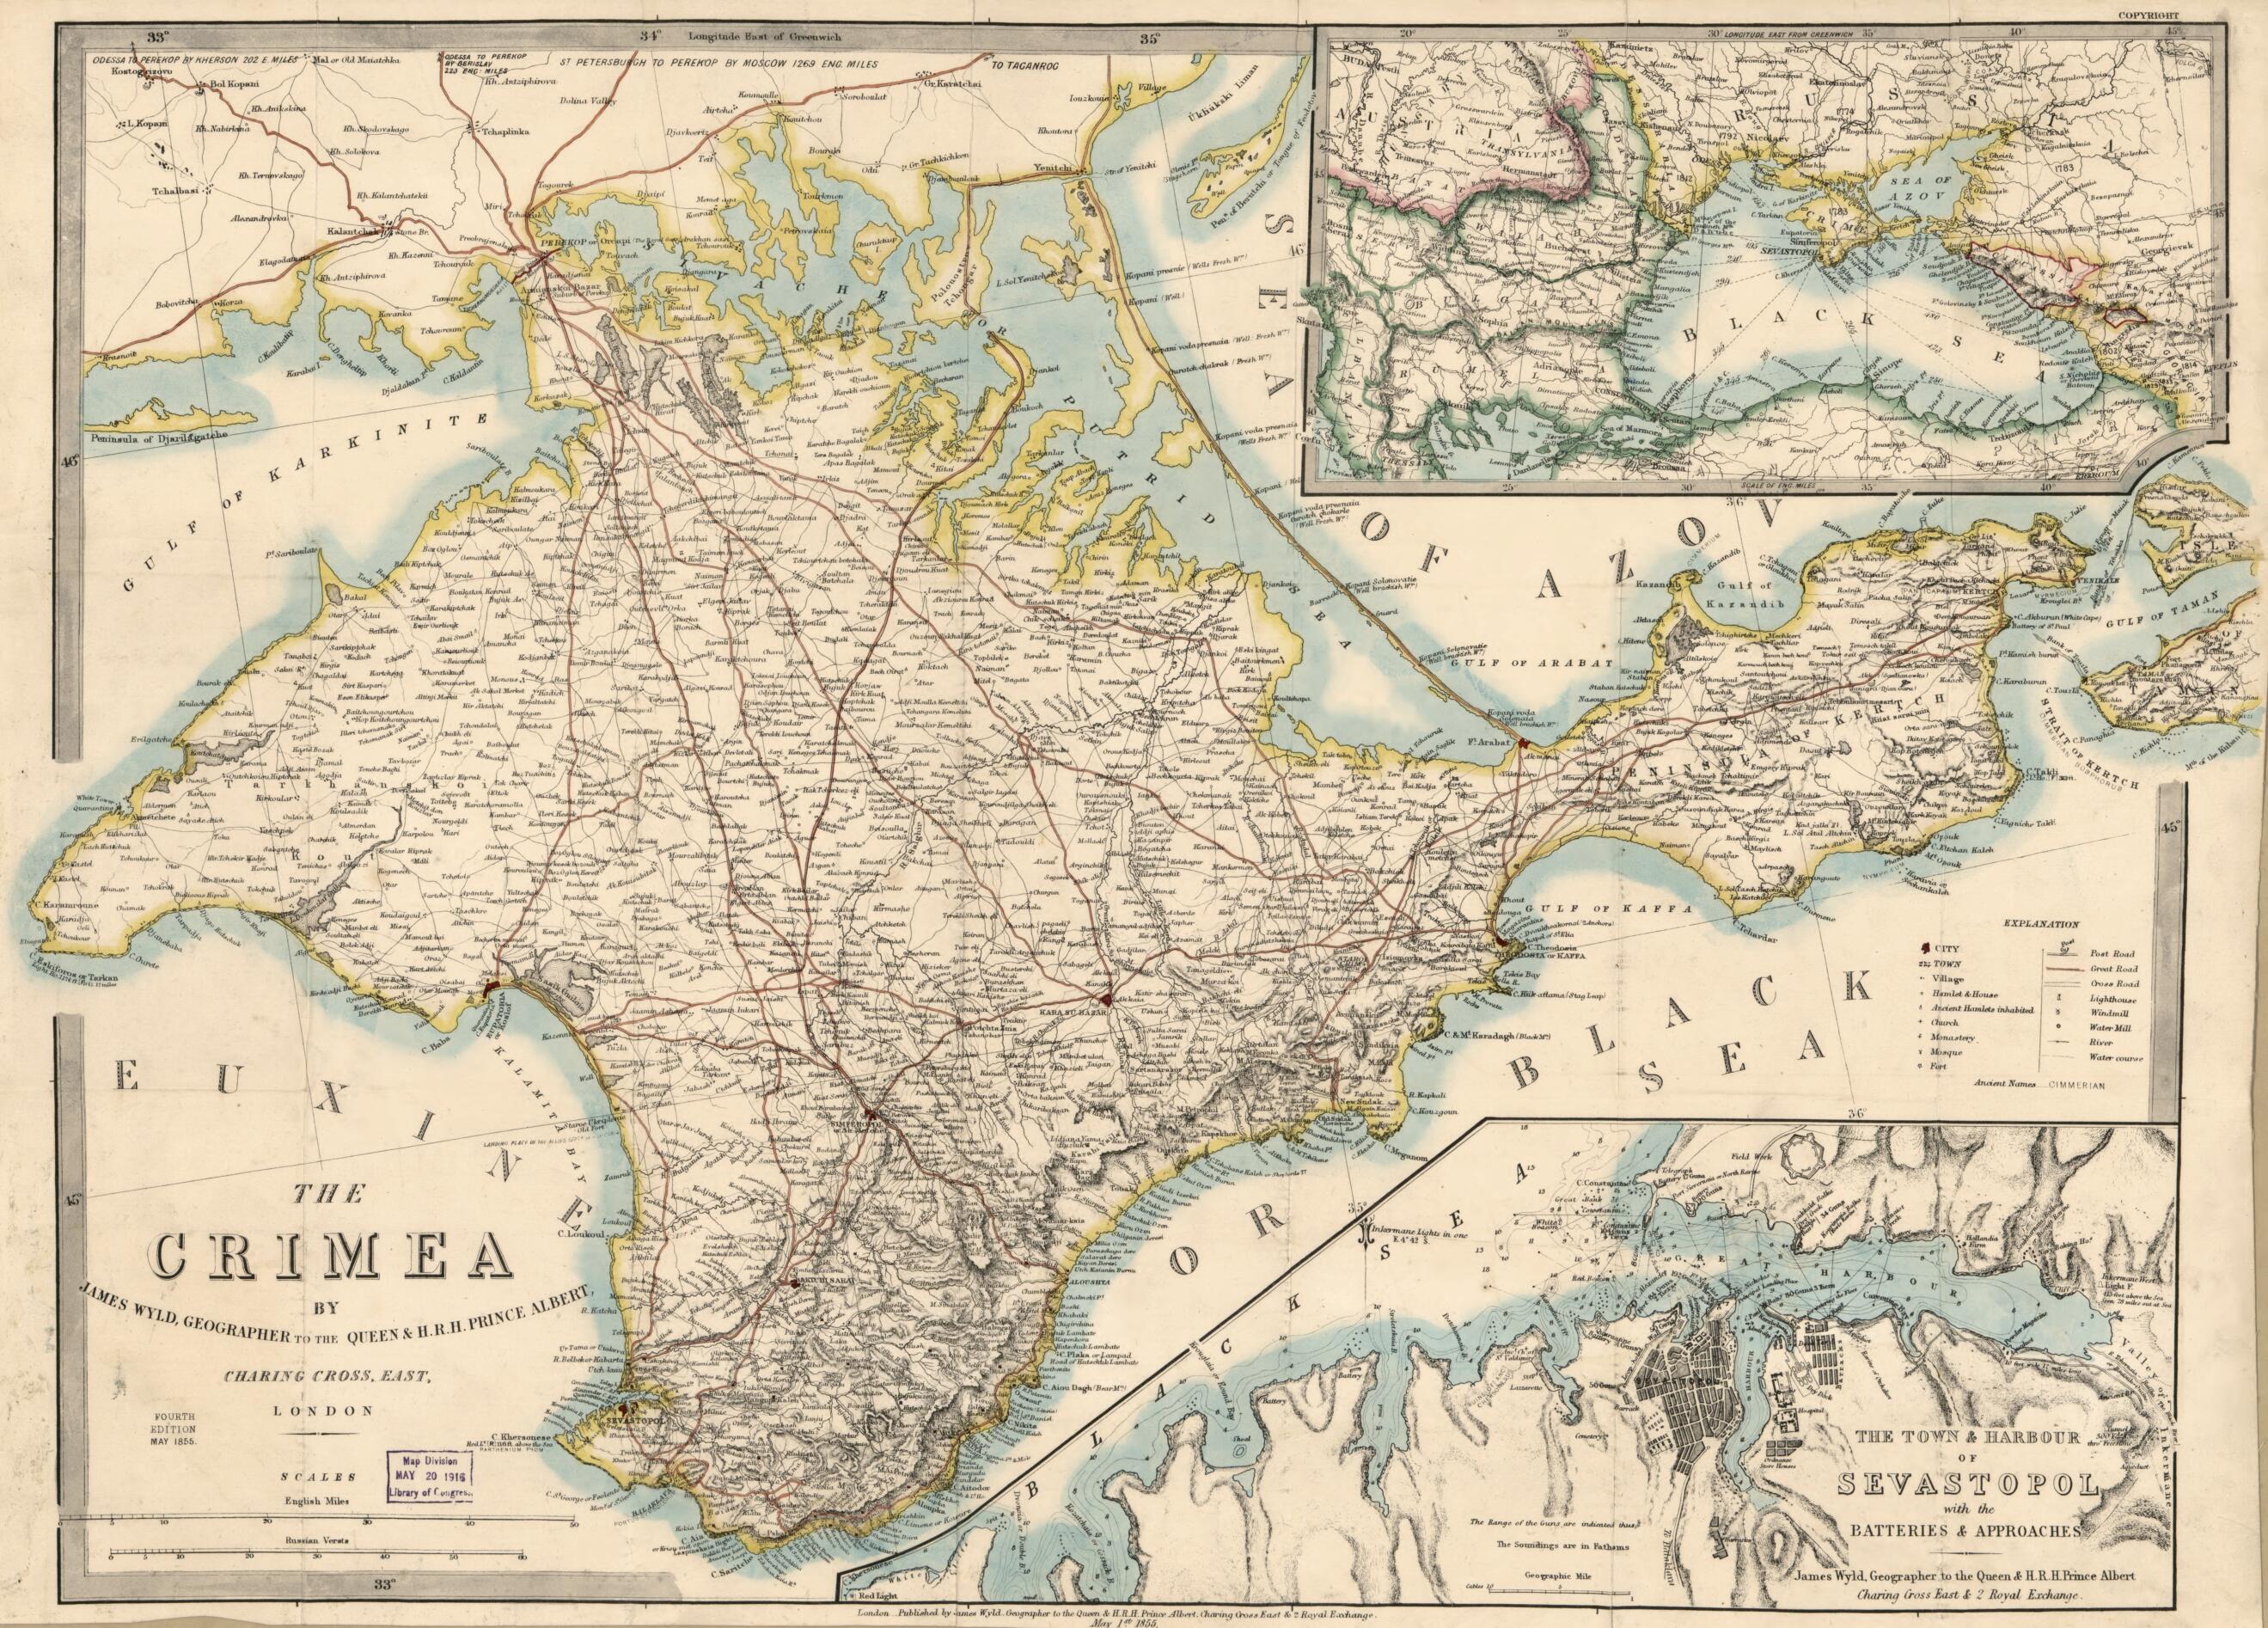 This old map of The Crimea from 1855 was created by Millard Fillmore, James Wyld in 1855